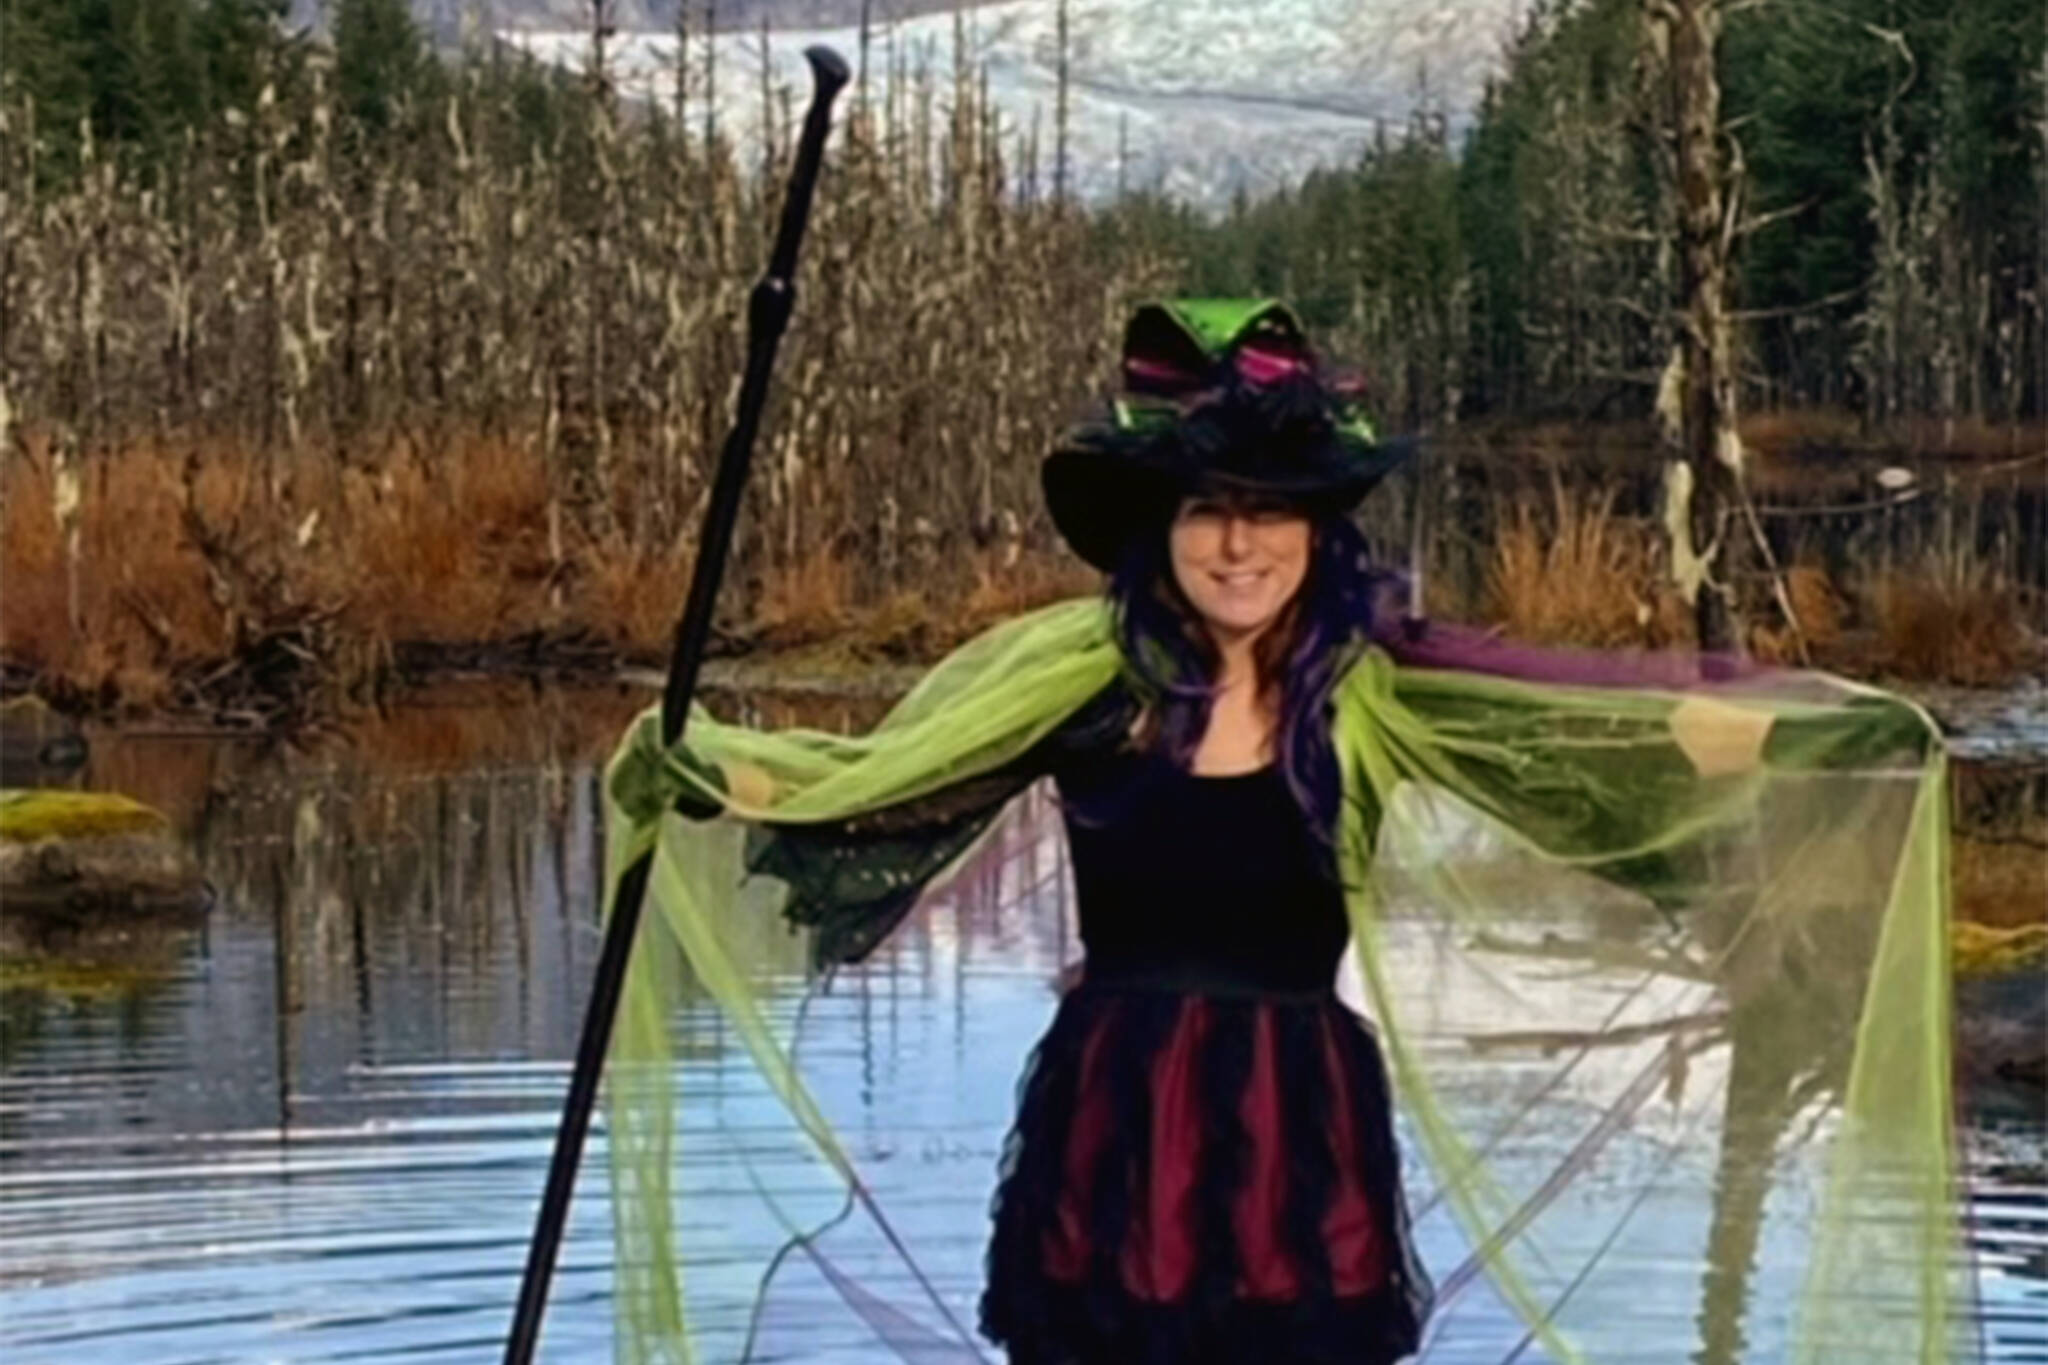 Spooks, spirits and shadowy shapes await visitors to the Juneau Huskies Haunted Hallow event, happening Friday, Saturday and Sunday. (Courtesy photo/Sam Adams)
Bev O’Brein shows off a witch costume in advance of the Auke Lake Witches Parade—a do-it-yourself flotilla designed to celebrate the season, and scheduled for Saturday. (Courtesy photo/Allan Edwards)